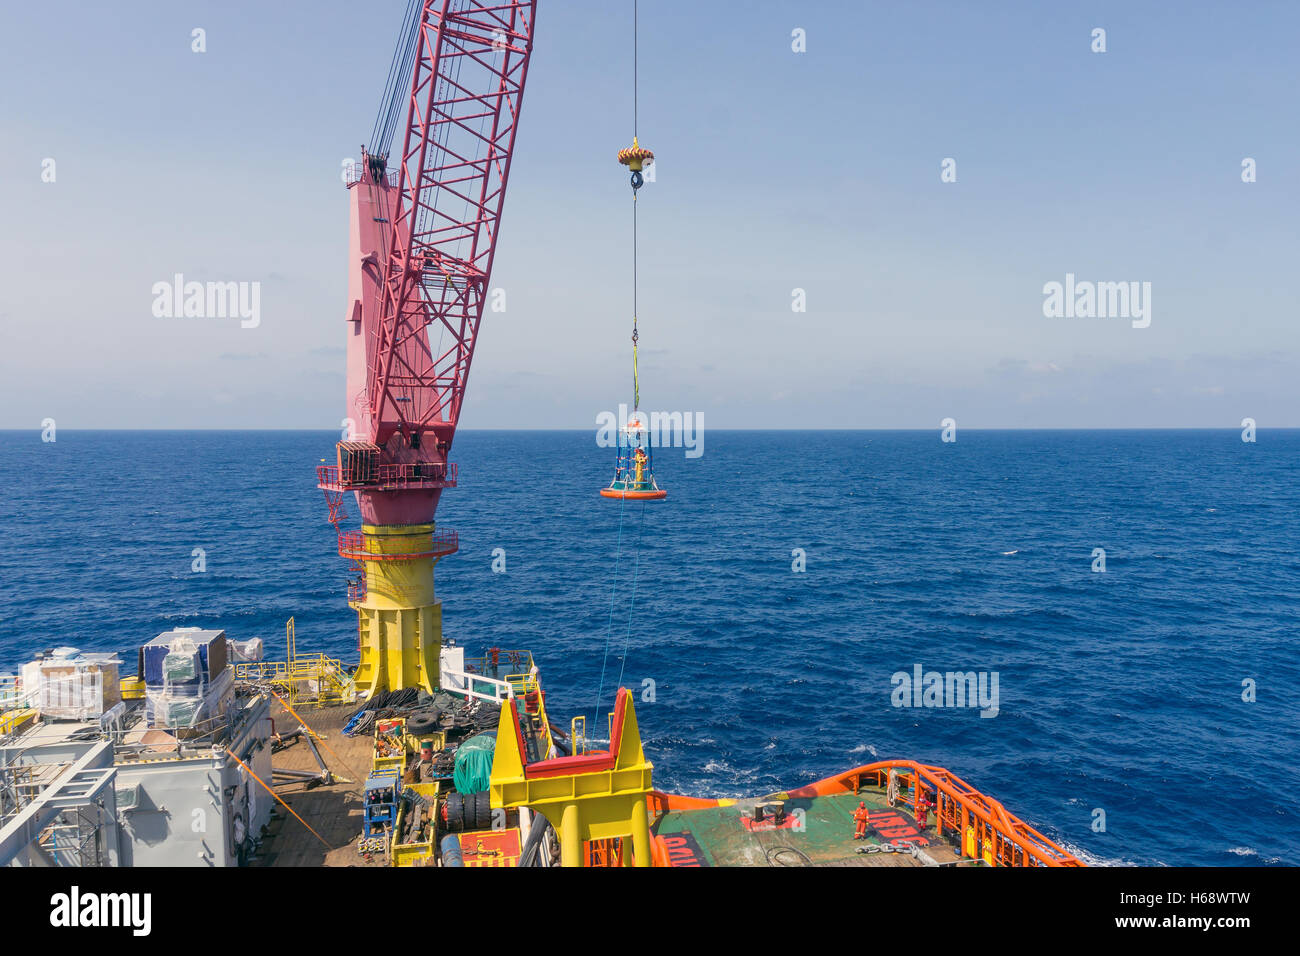 Offshore worker being lifted using personal transfer basket from construction barge to tug boat Stock Photo